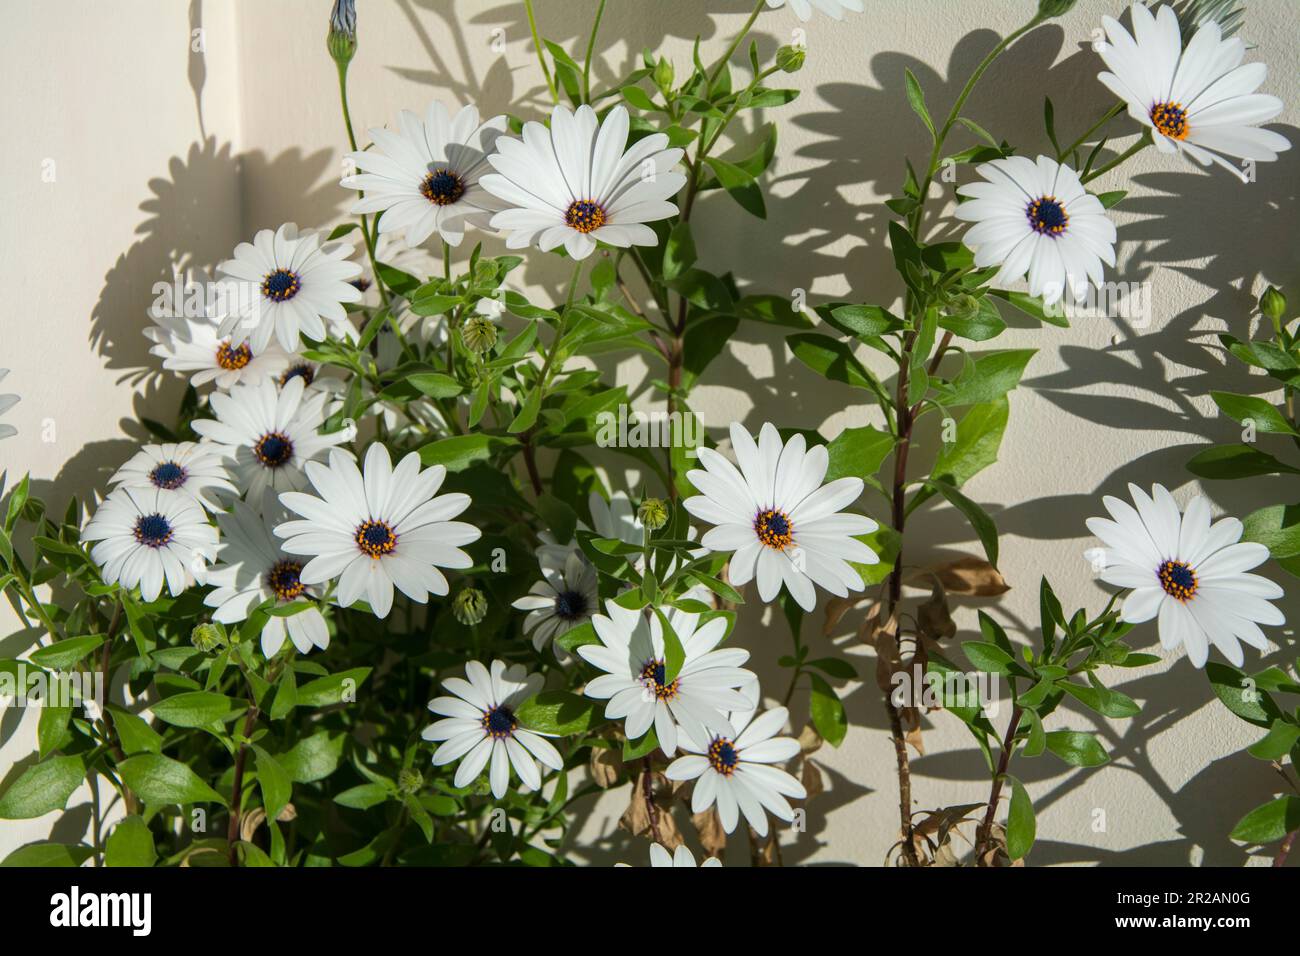 A closeup of a Van Staden's River daisy (Dimorphotheca ecklonis) with big flowers. Horizontal image with selective focus Stock Photo